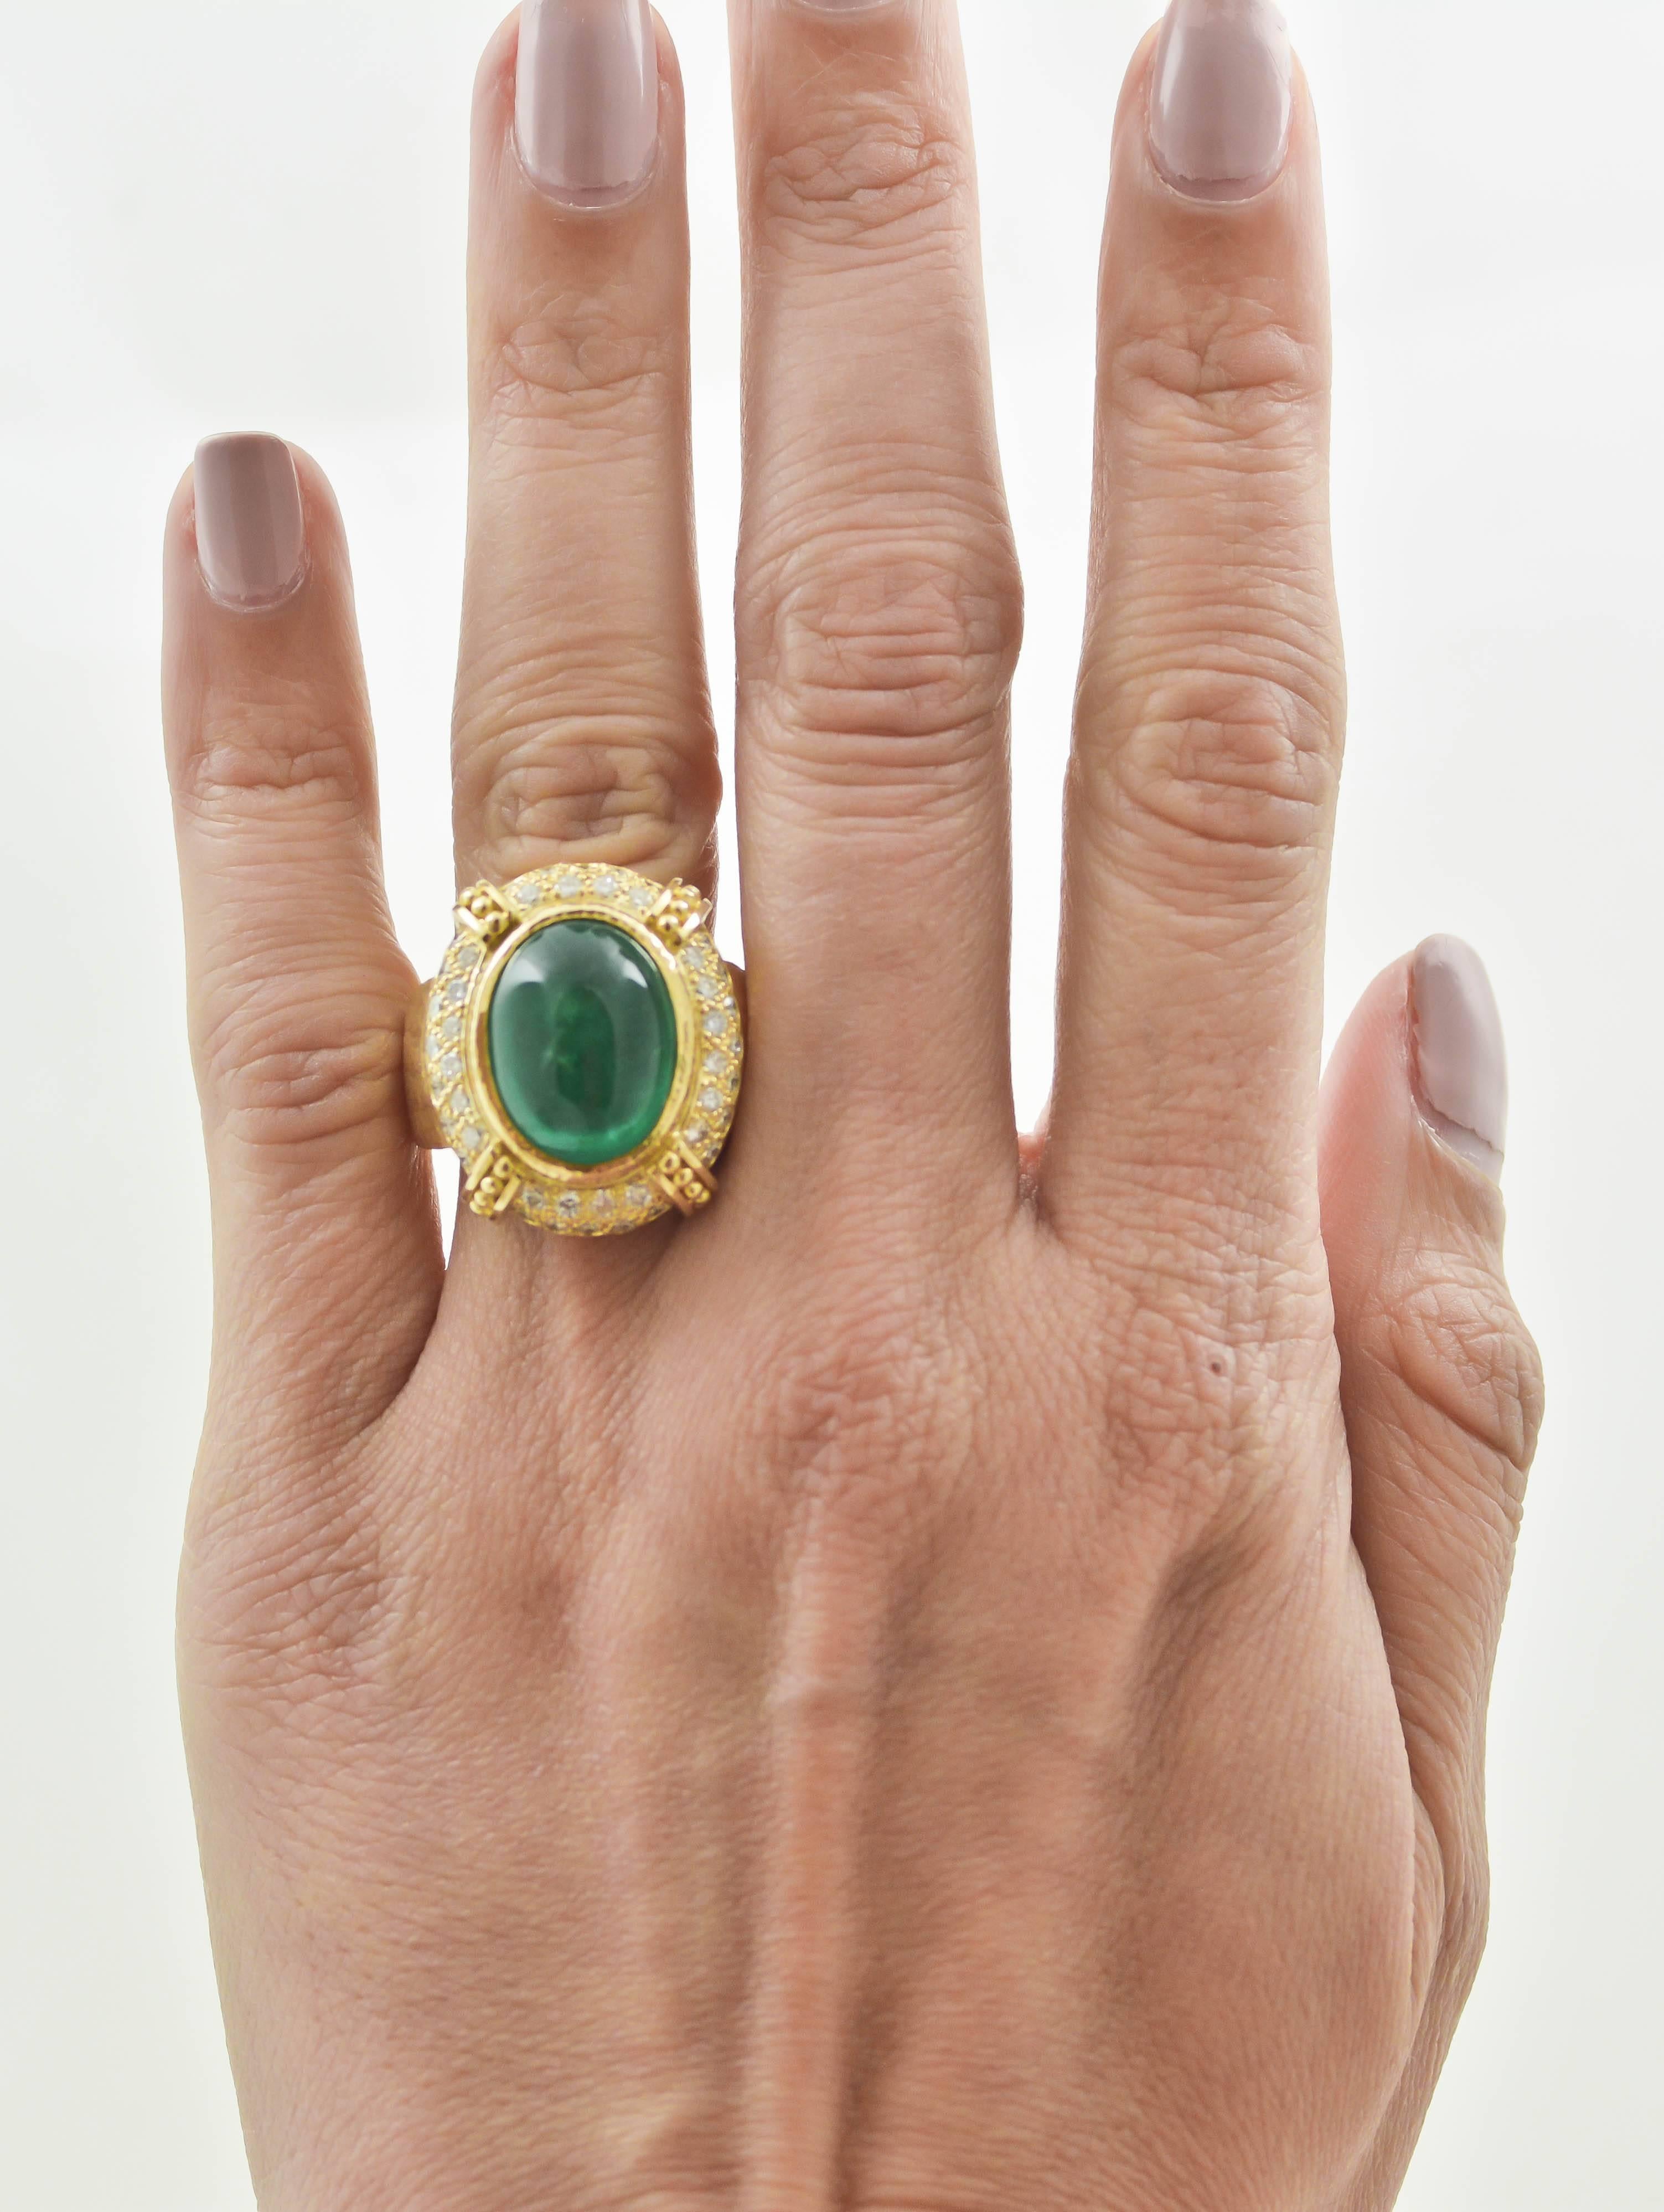 A cascade of textures surrounding the intense green emerald in this 18kt yellow gold ring, remind us of a gorgeous sunny day. The vibrant green color of a 12.59 carat, oval cabochon cut emerald makes this eye-catching ring a stunning, Tuscan style